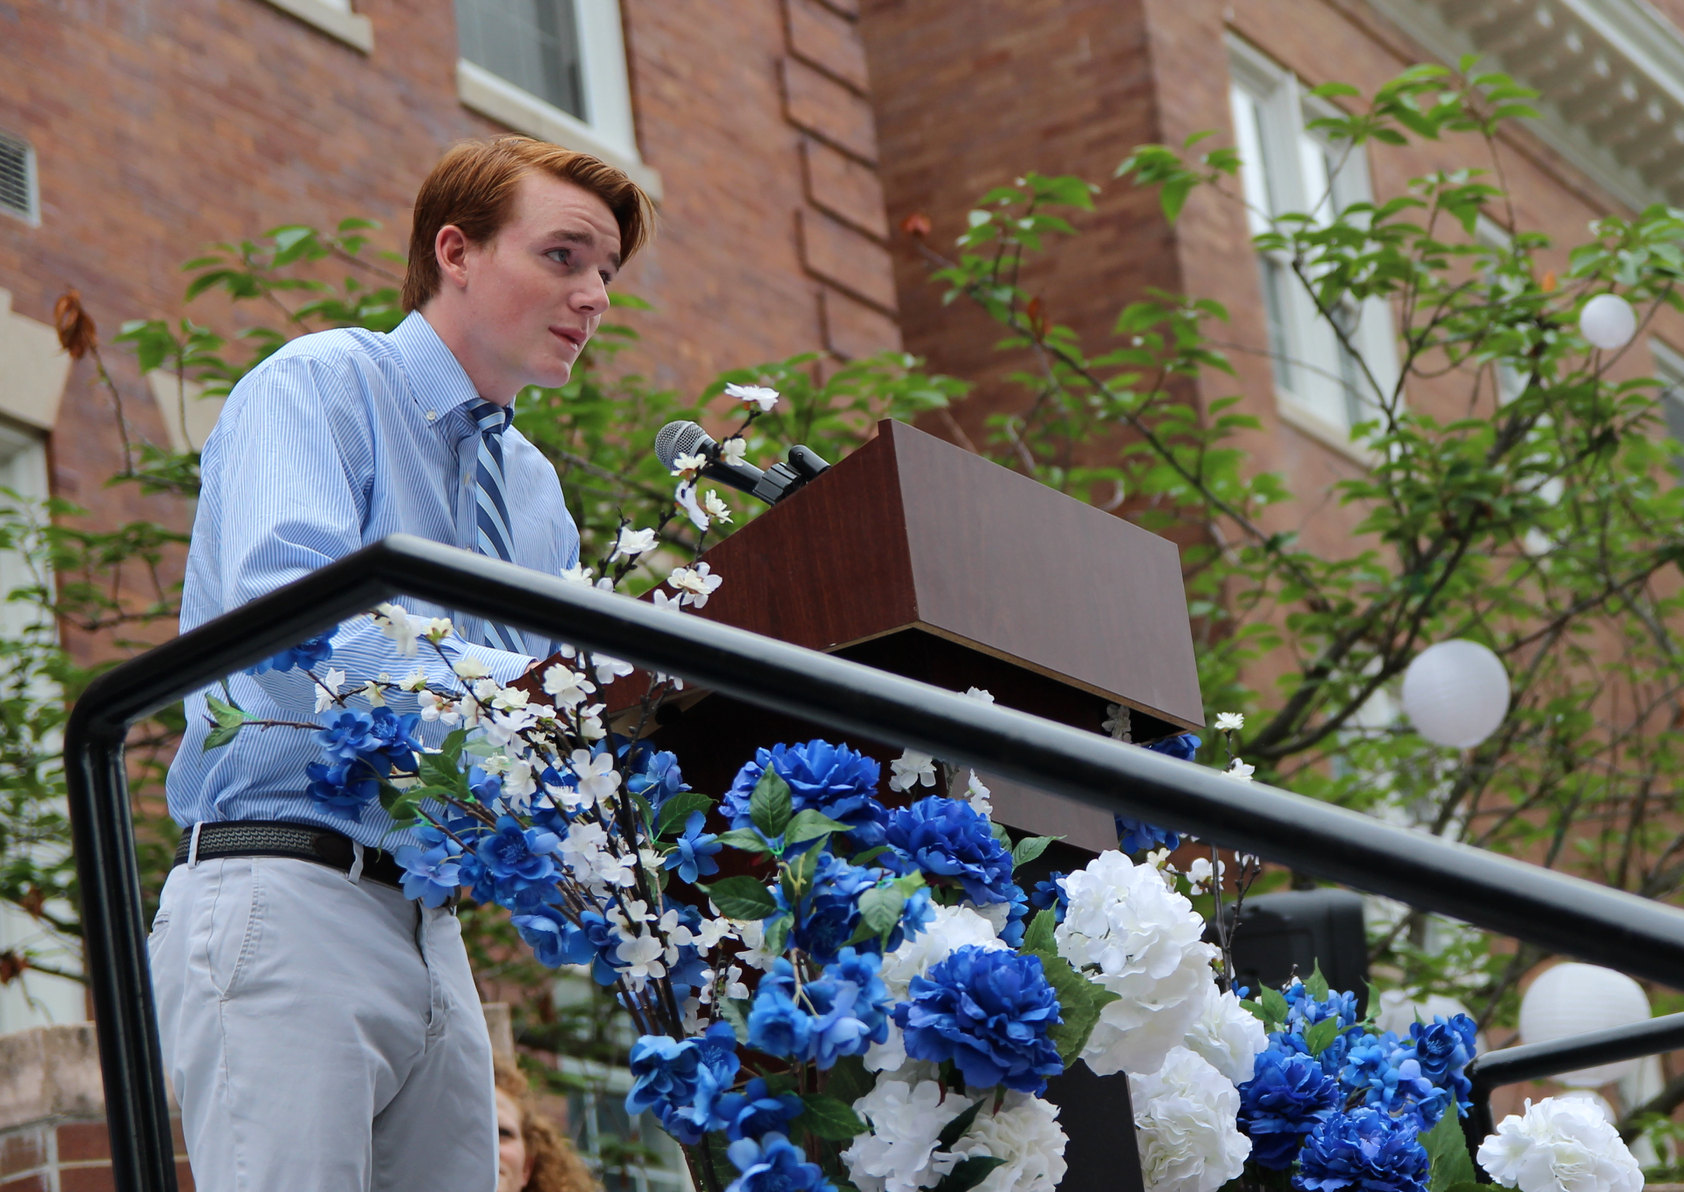 Bennett Tiedy received a Citizenship Award from Old Greenwich School. June 20, 2018 Photo: Leslie Yager